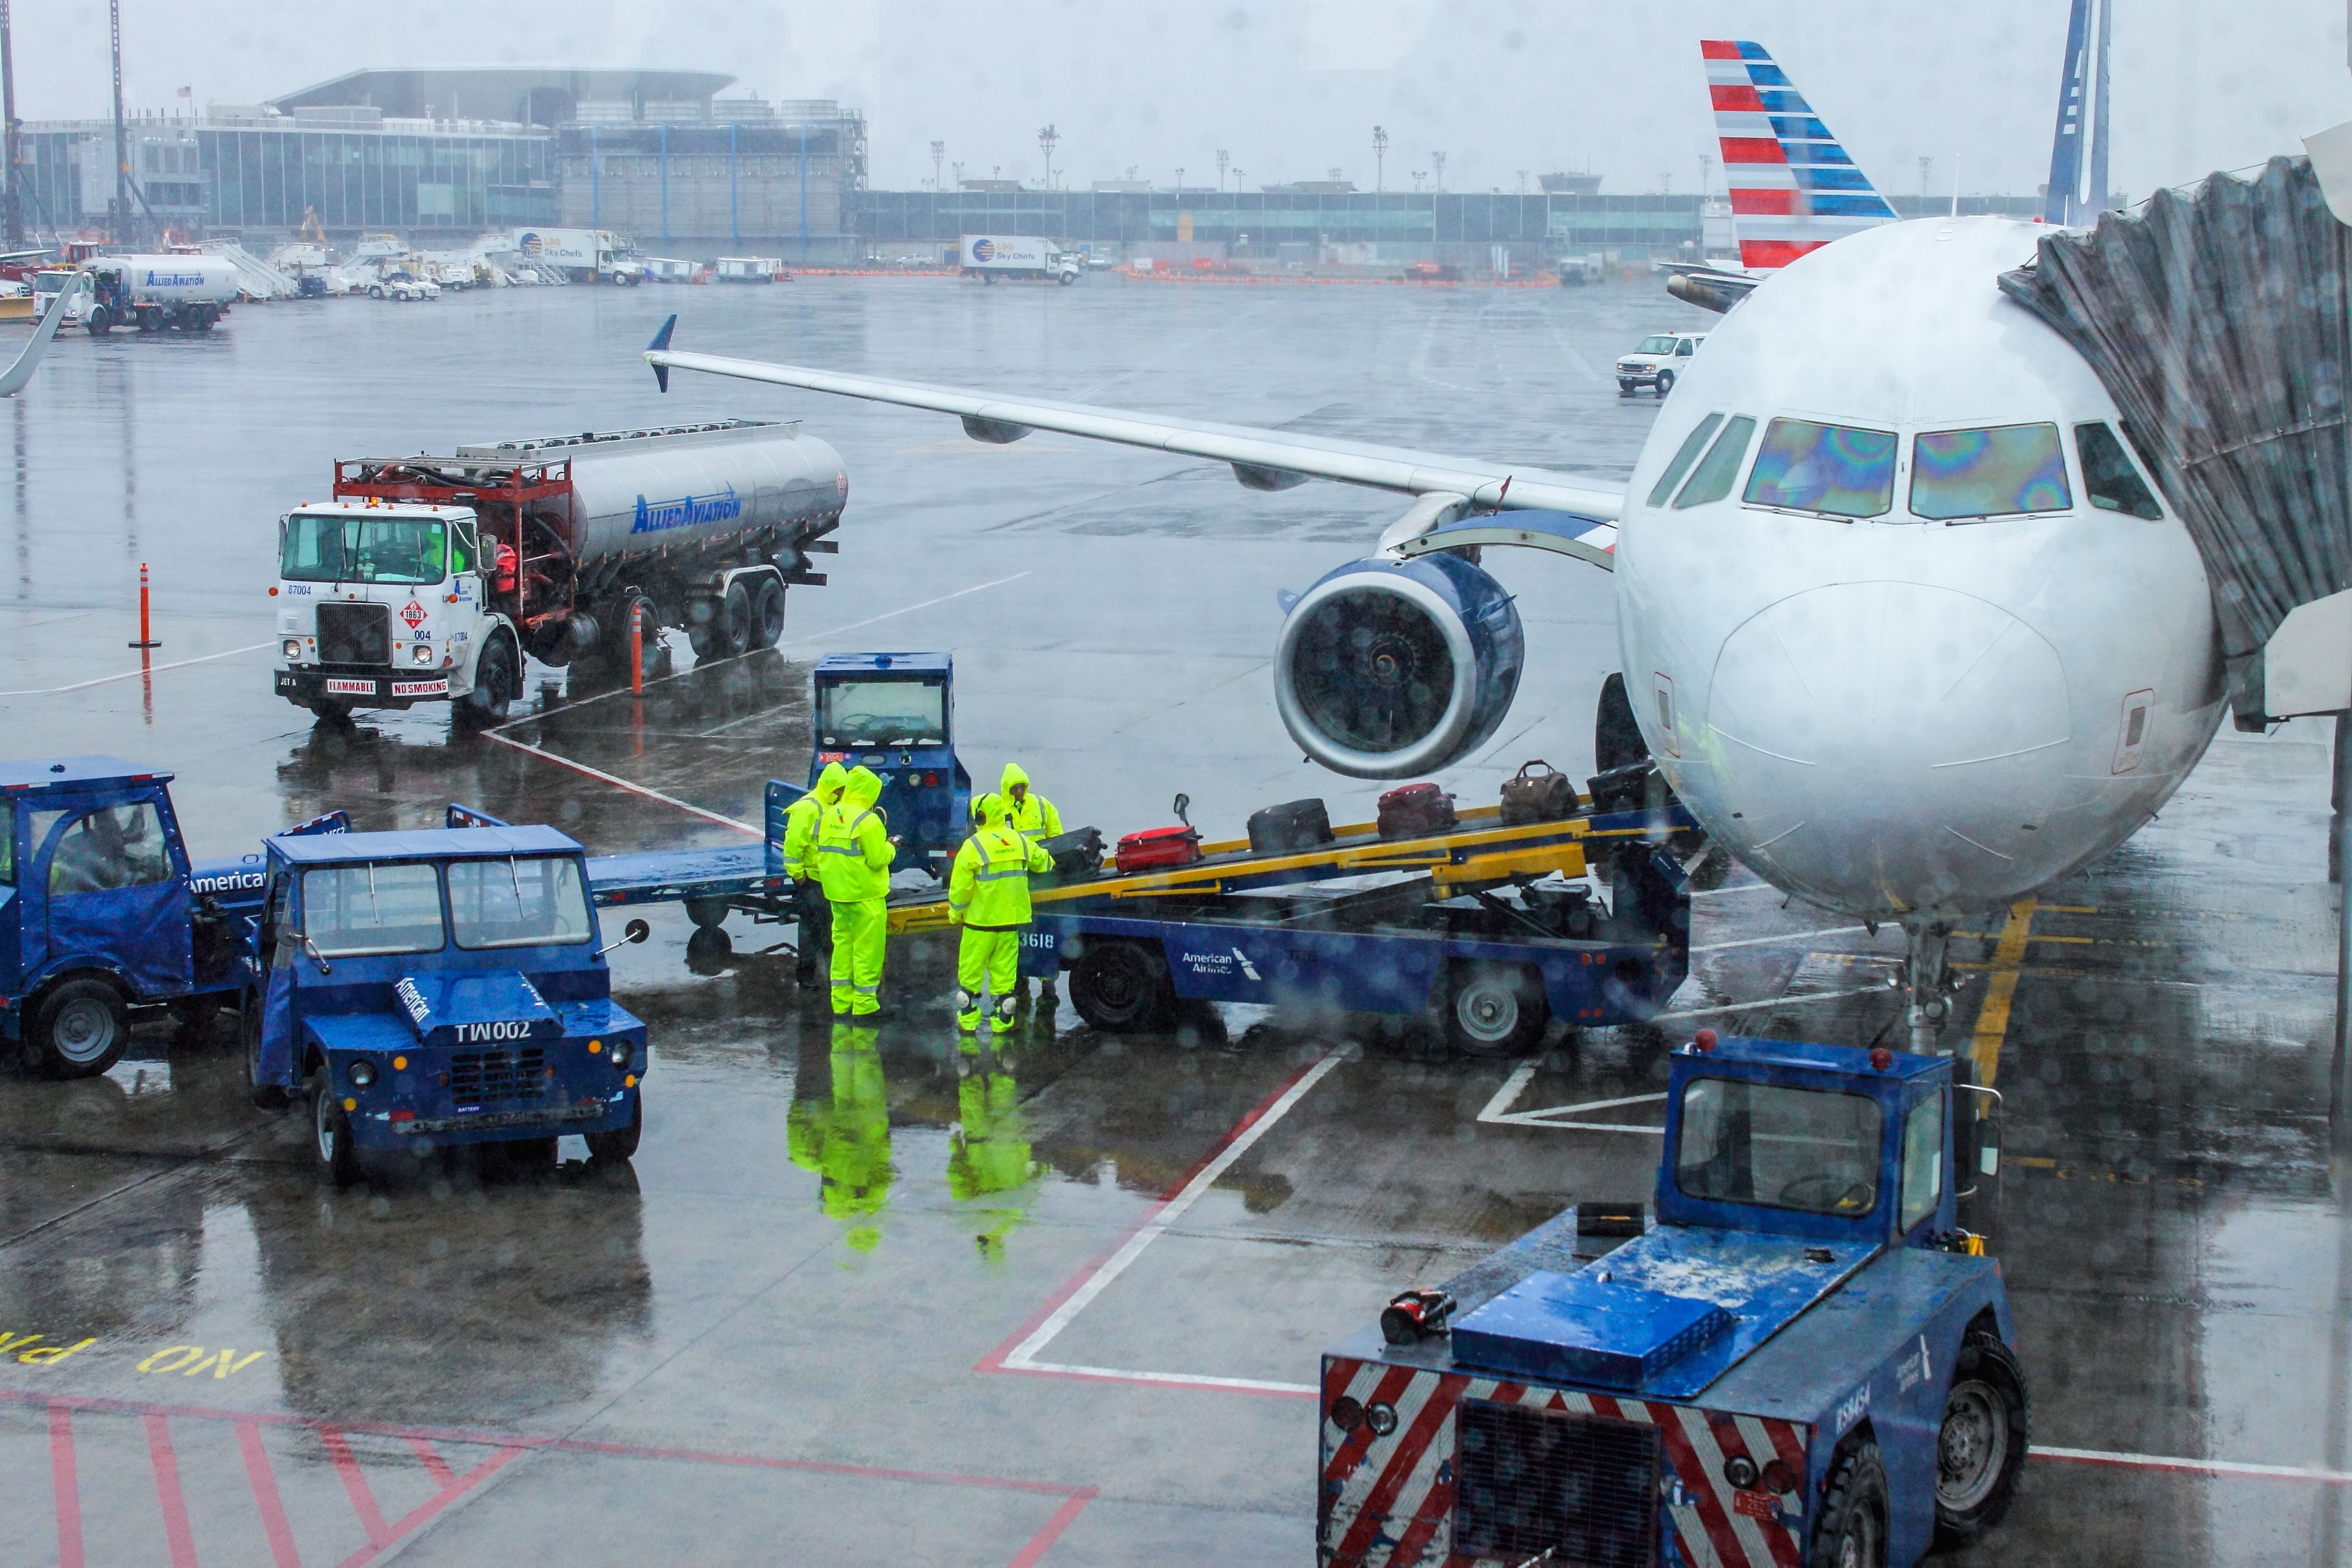 irport ground crew handling baggage on a rainy day at LaGuardia Airport preparing for flight.